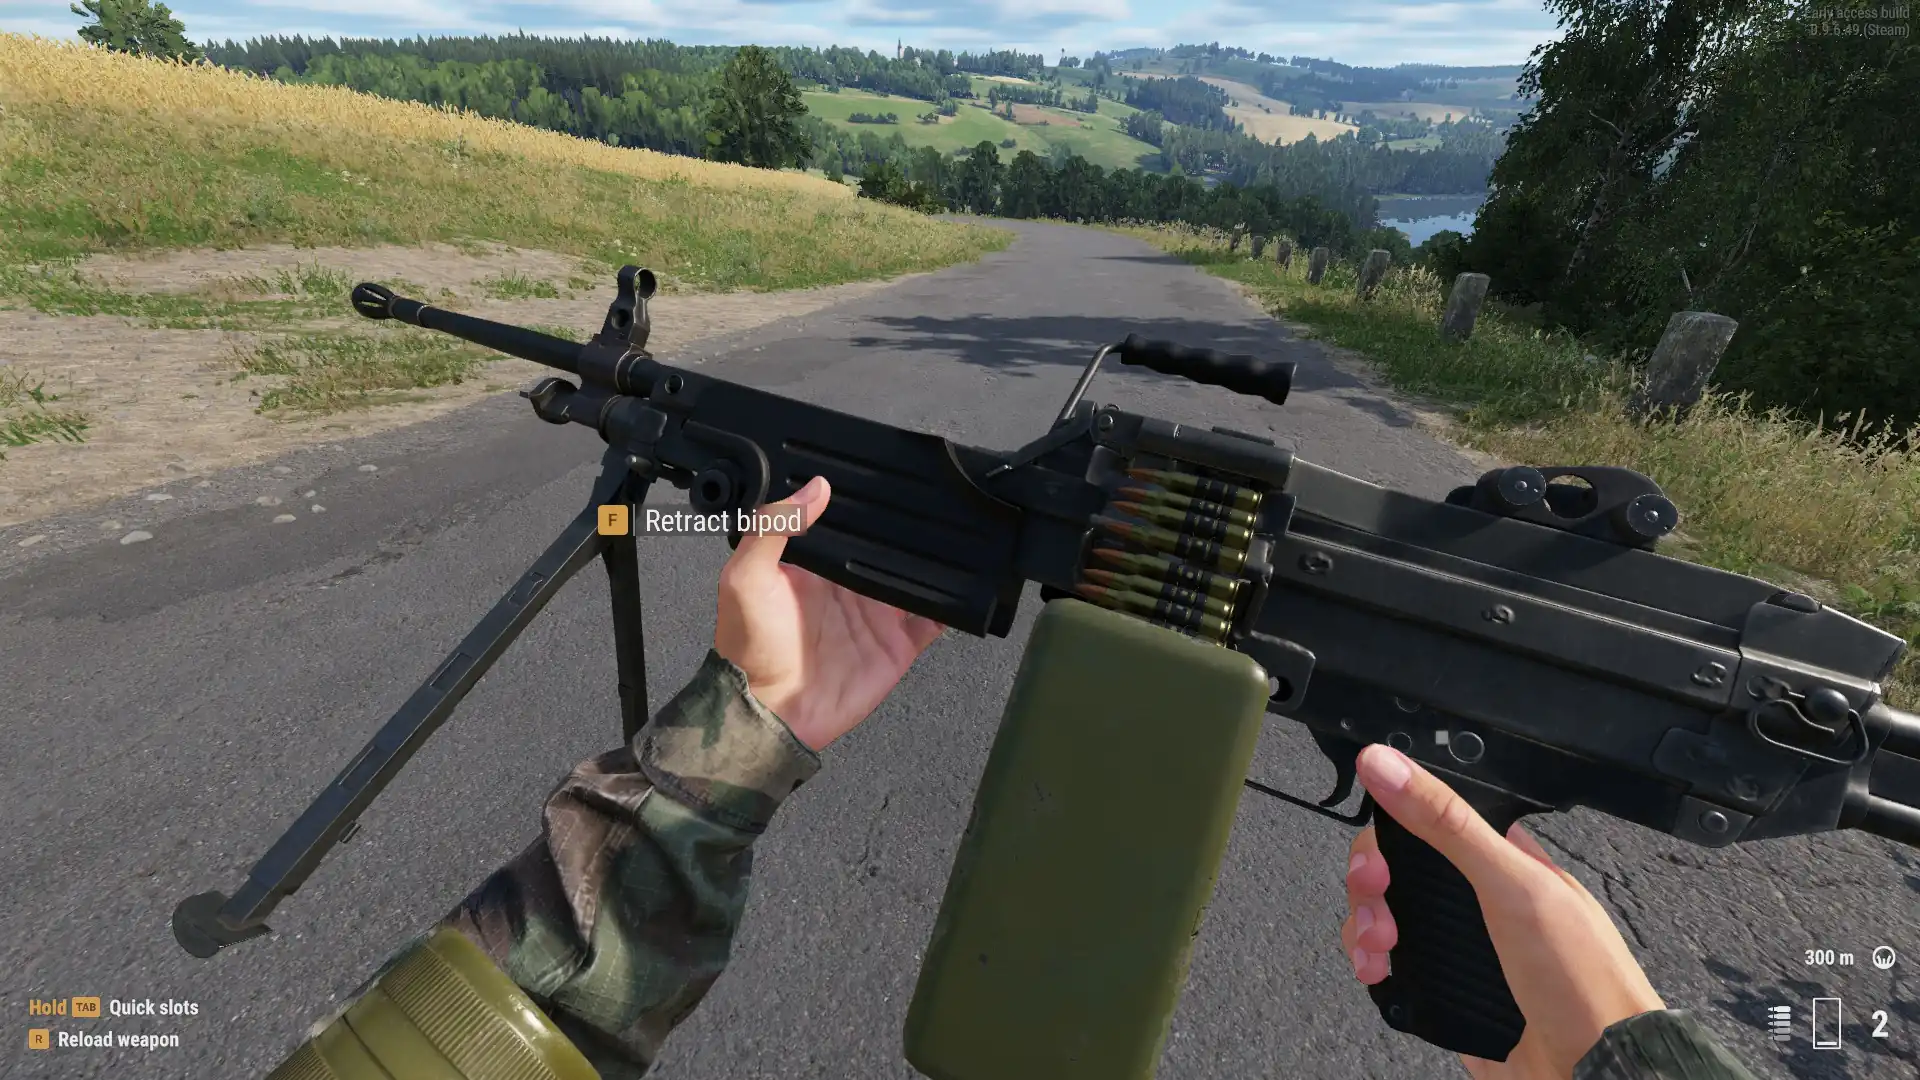 Extend the bipod in Arma Reforger easily.